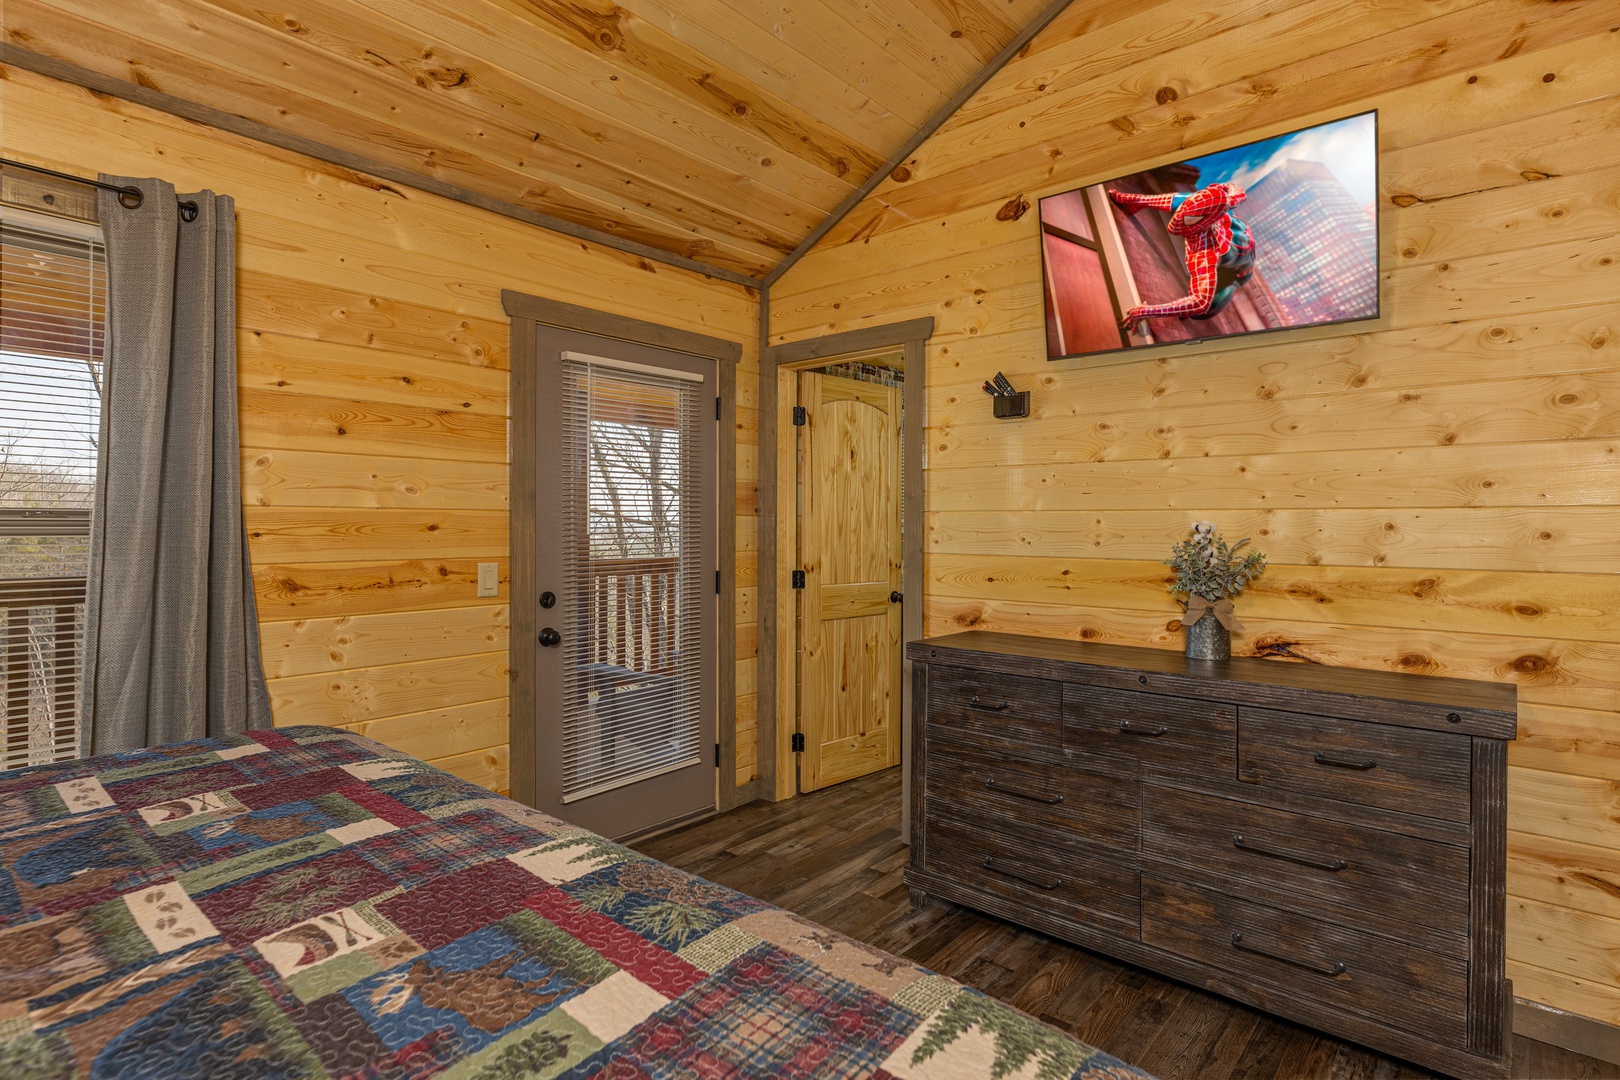 Dresser, TV, and deck access in a bedroom at Everly's Splash, a 4 bedroom cabin rental located in Pigeon Forge